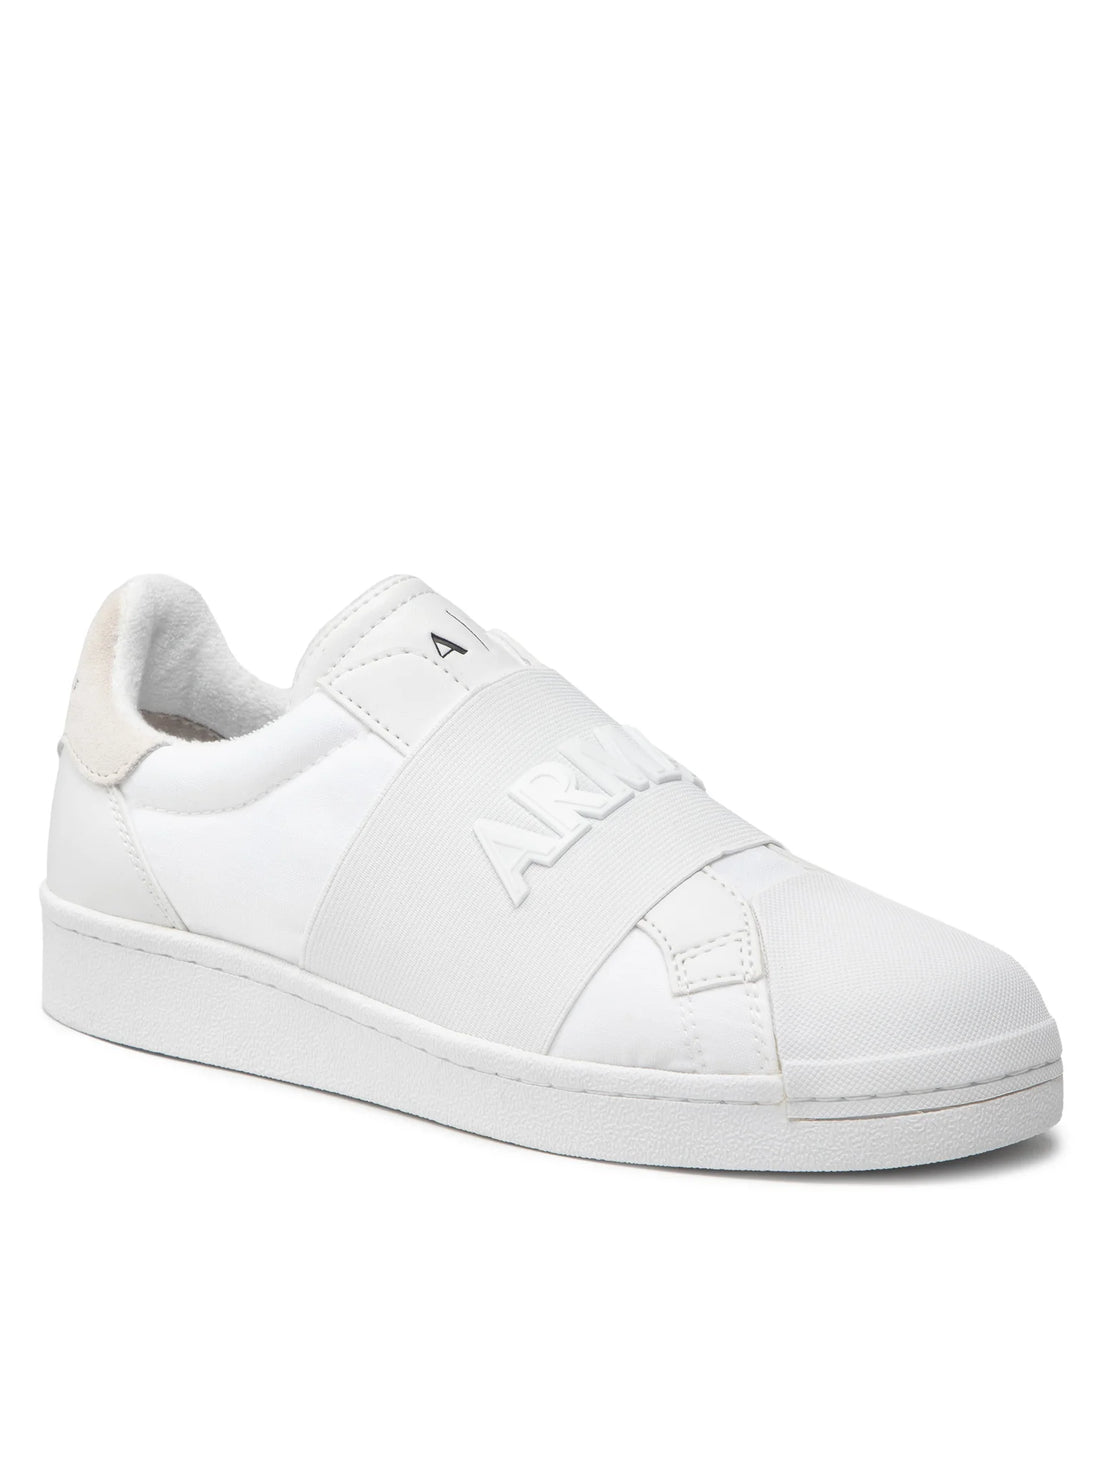 SNEAKER CALF PU+SUEDE+NY OPT WHITE